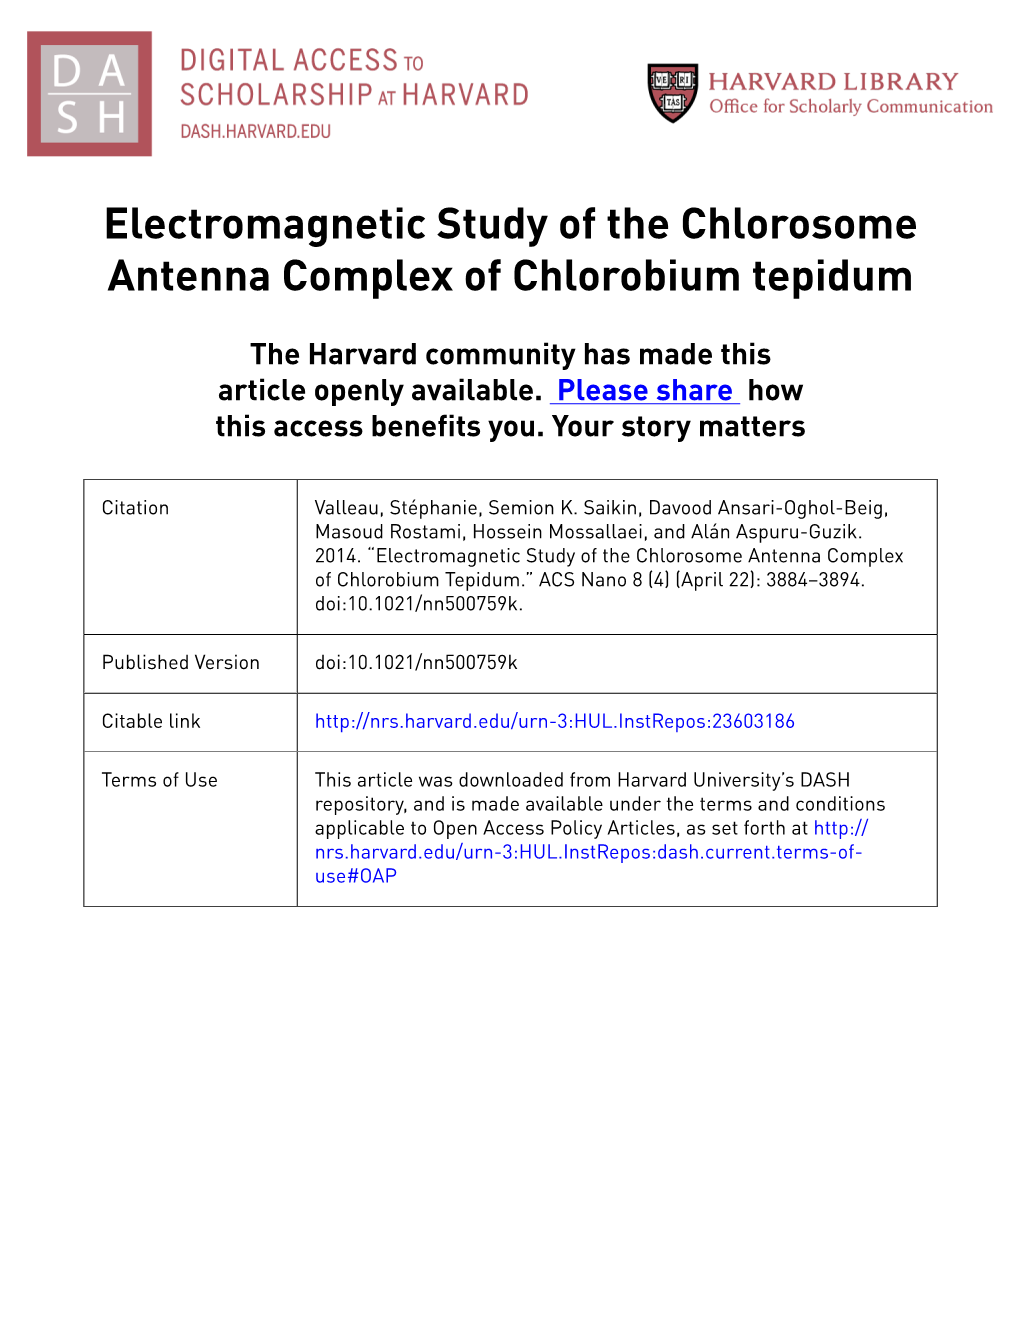 Electromagnetic Study of the Chlorosome Antenna Complex of Chlorobium Tepidum